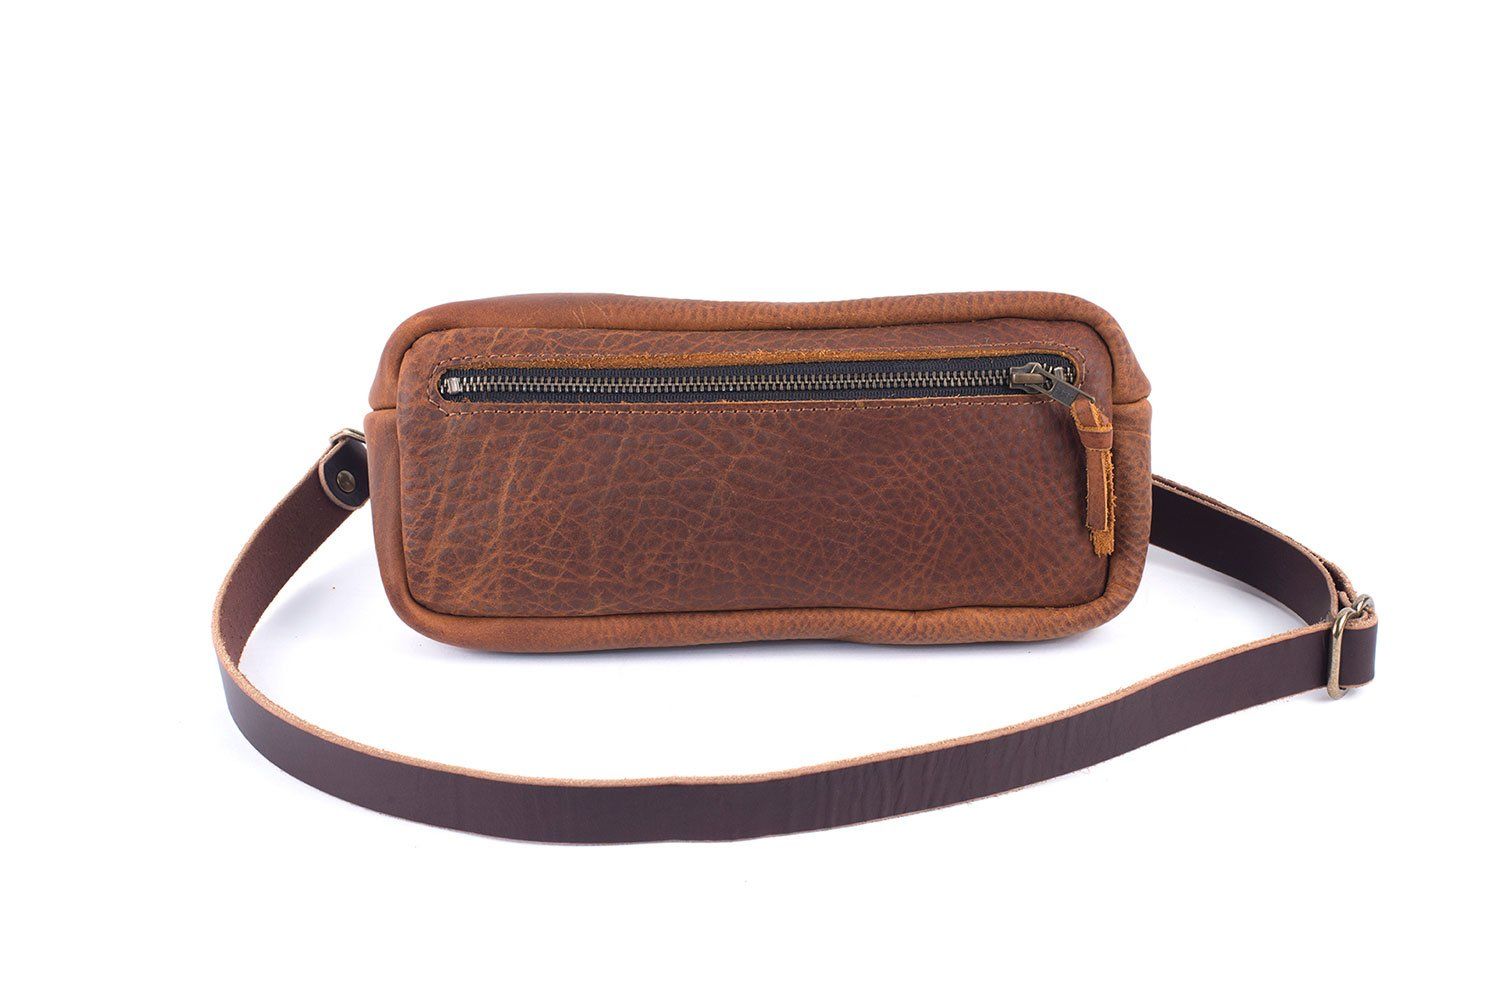 ITAMOOD Genuine Leather Waist Packs for Women Fashion Fanny Pack